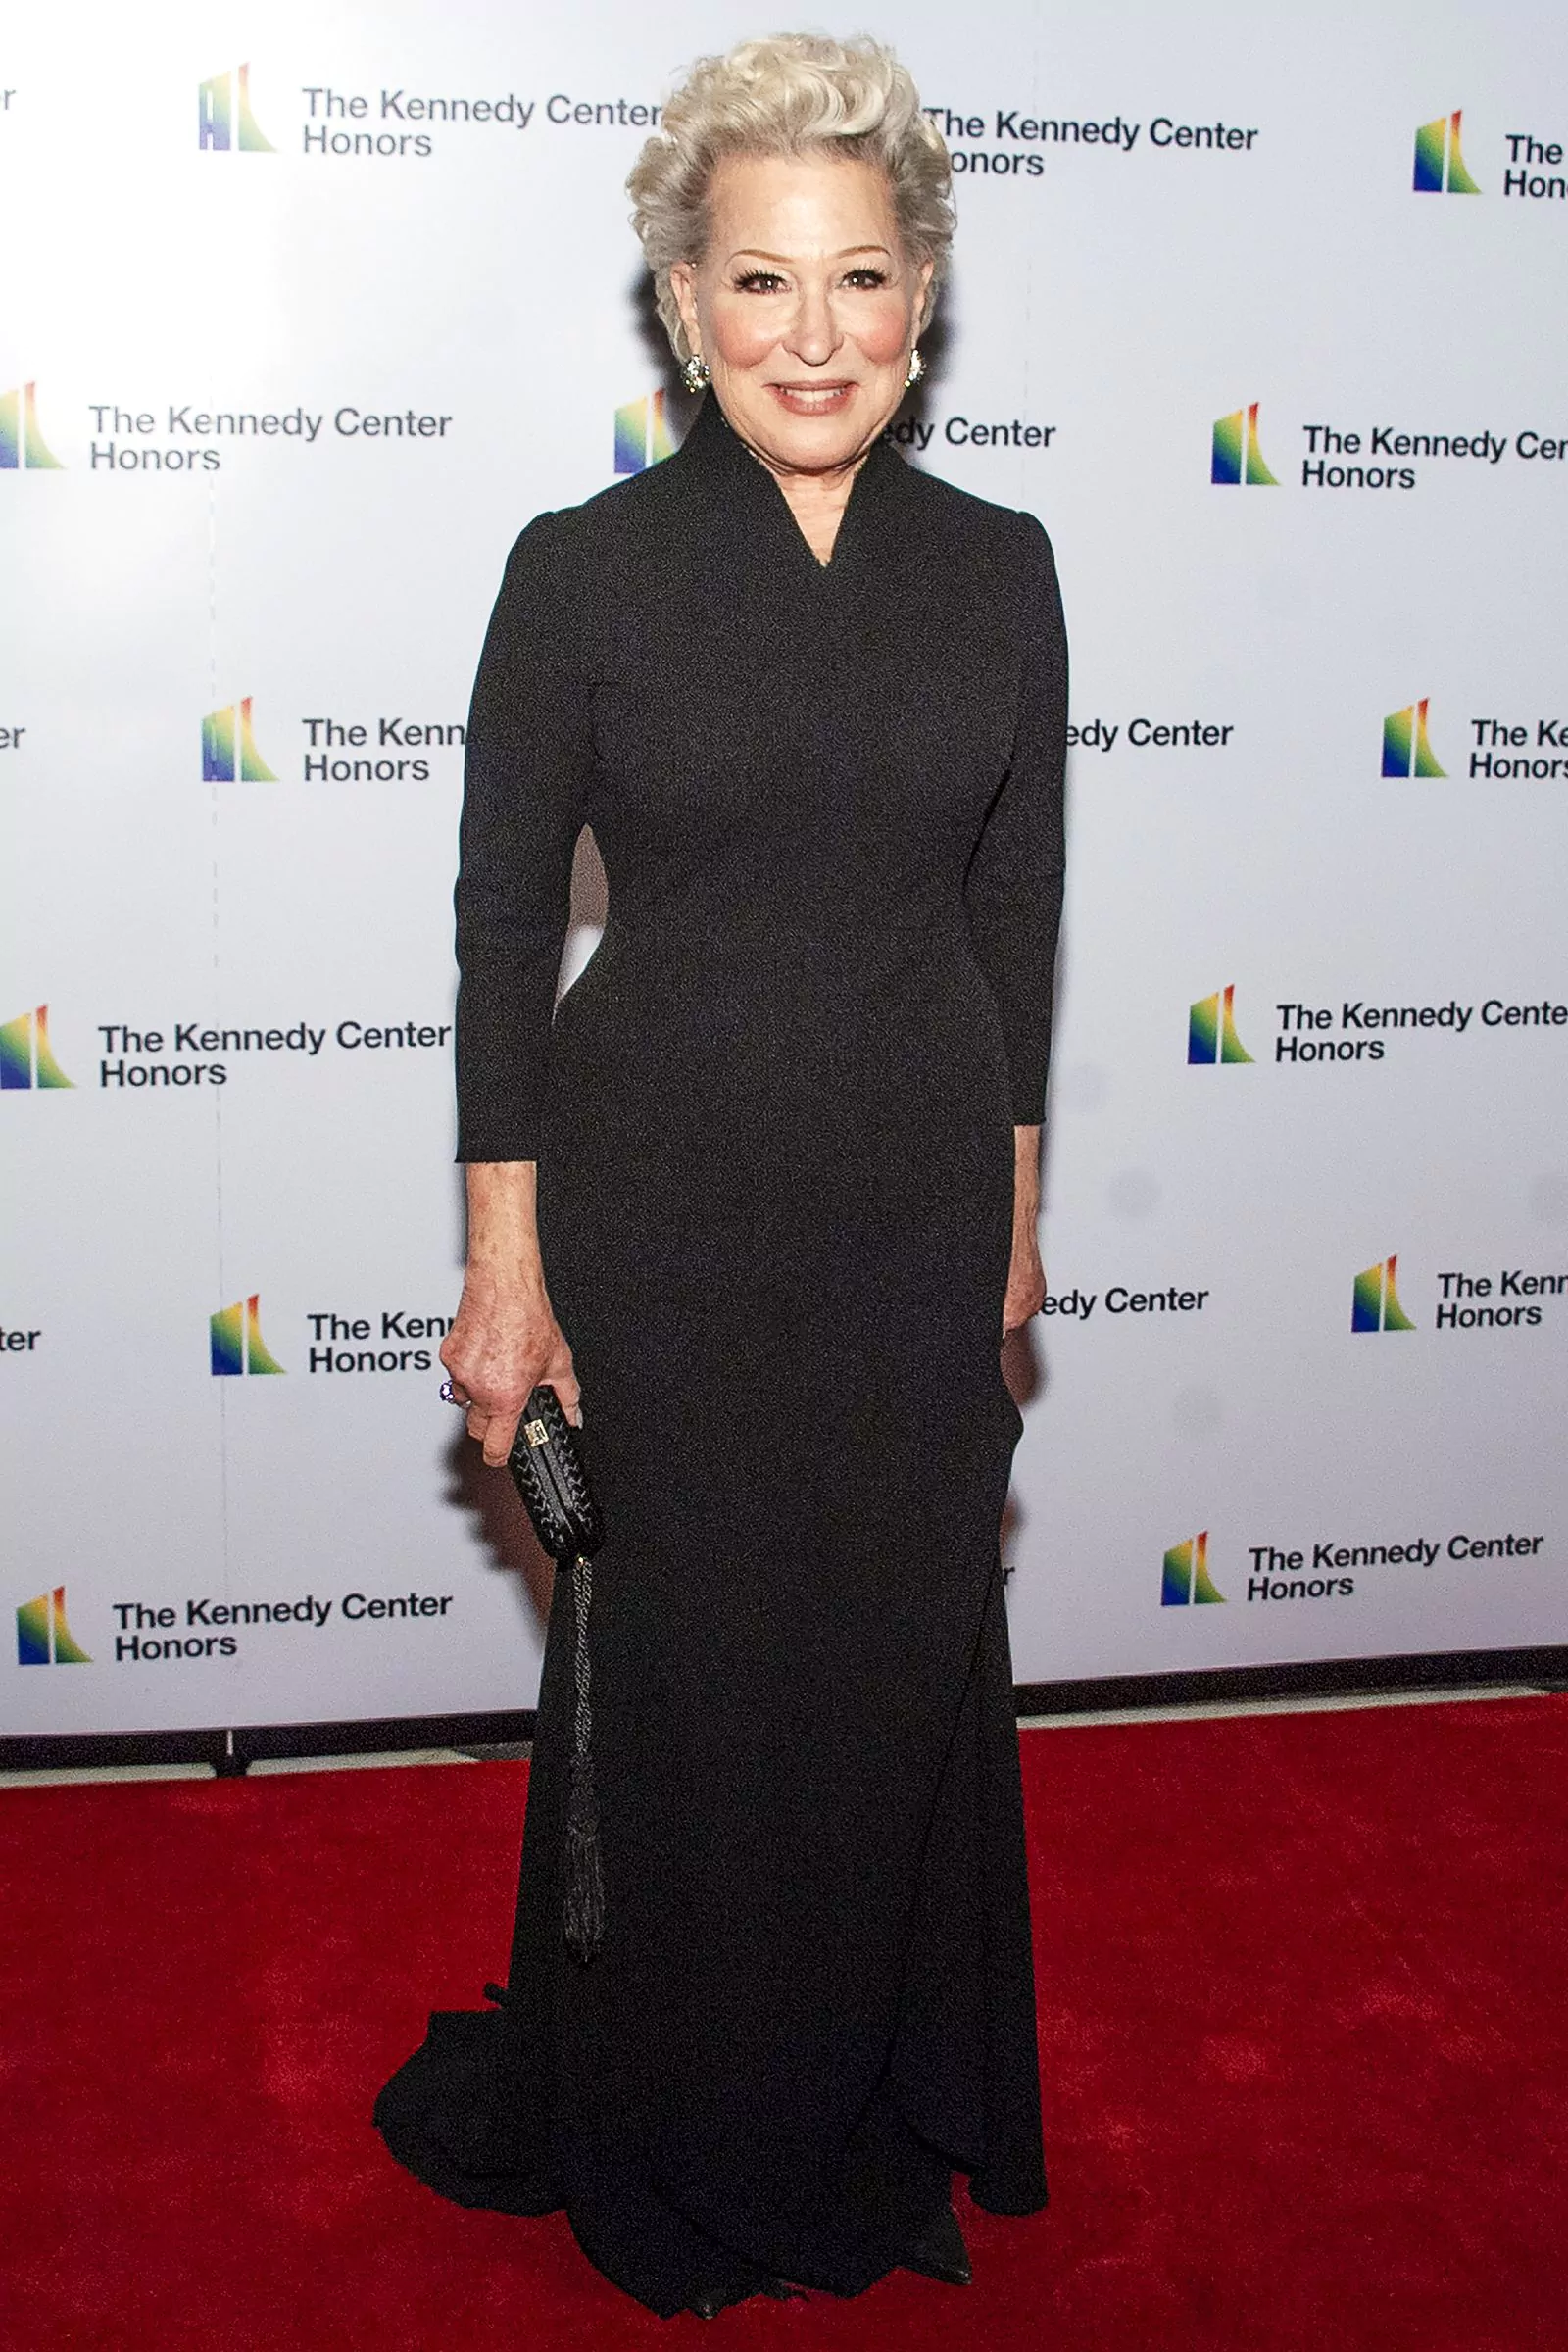 Bette Midler at the 44th Annual Kennedy Center Honors, December 4, 2021